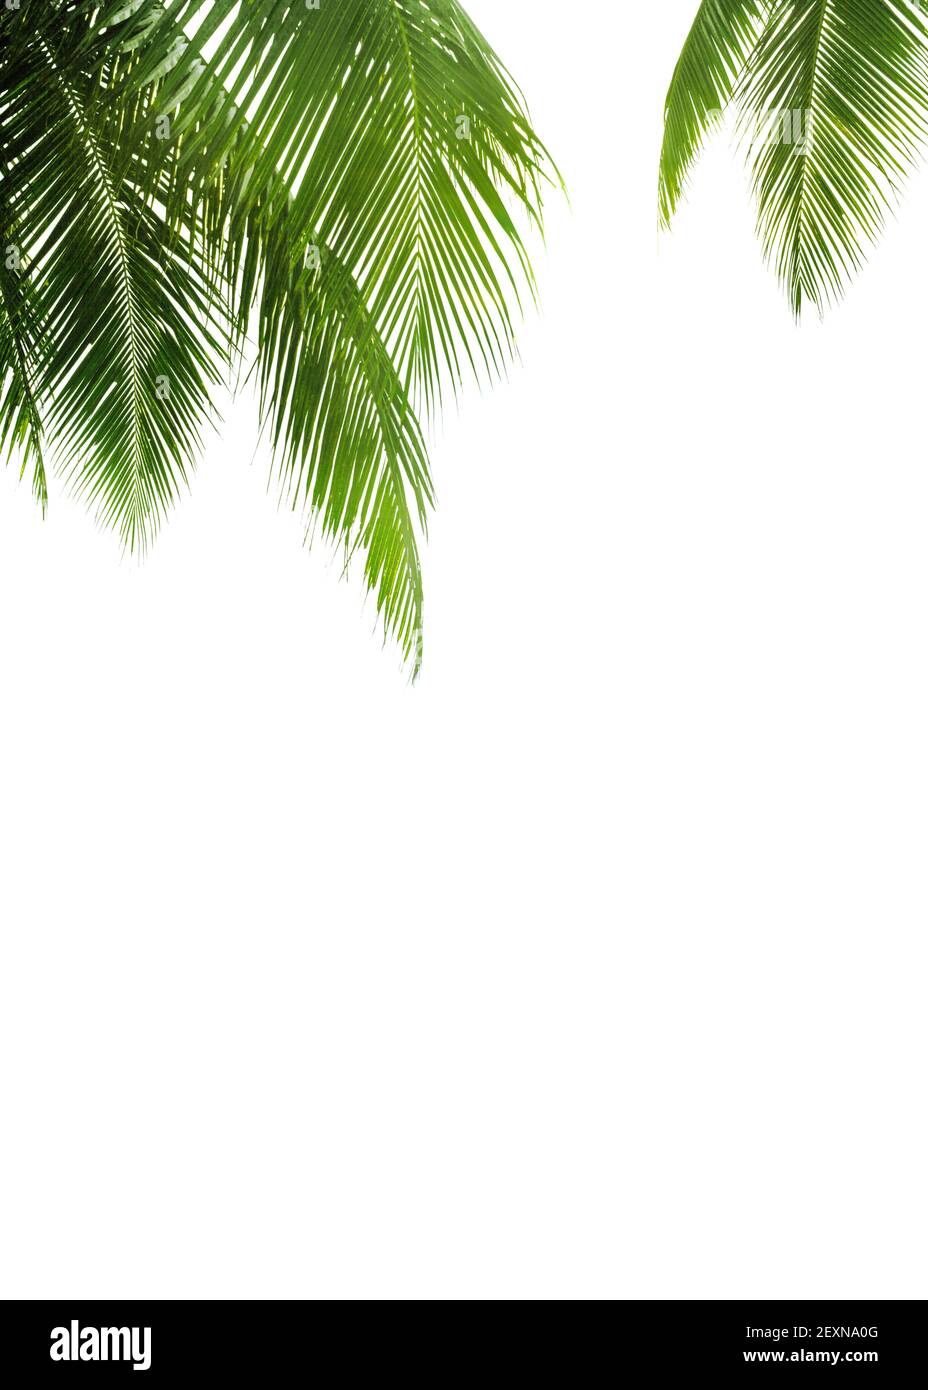 Green palm leaves white background isolated closeup, palm leaf corner border, palm branches frame, palm tree, tropical foliage banner, exotic pattern Stock Photo